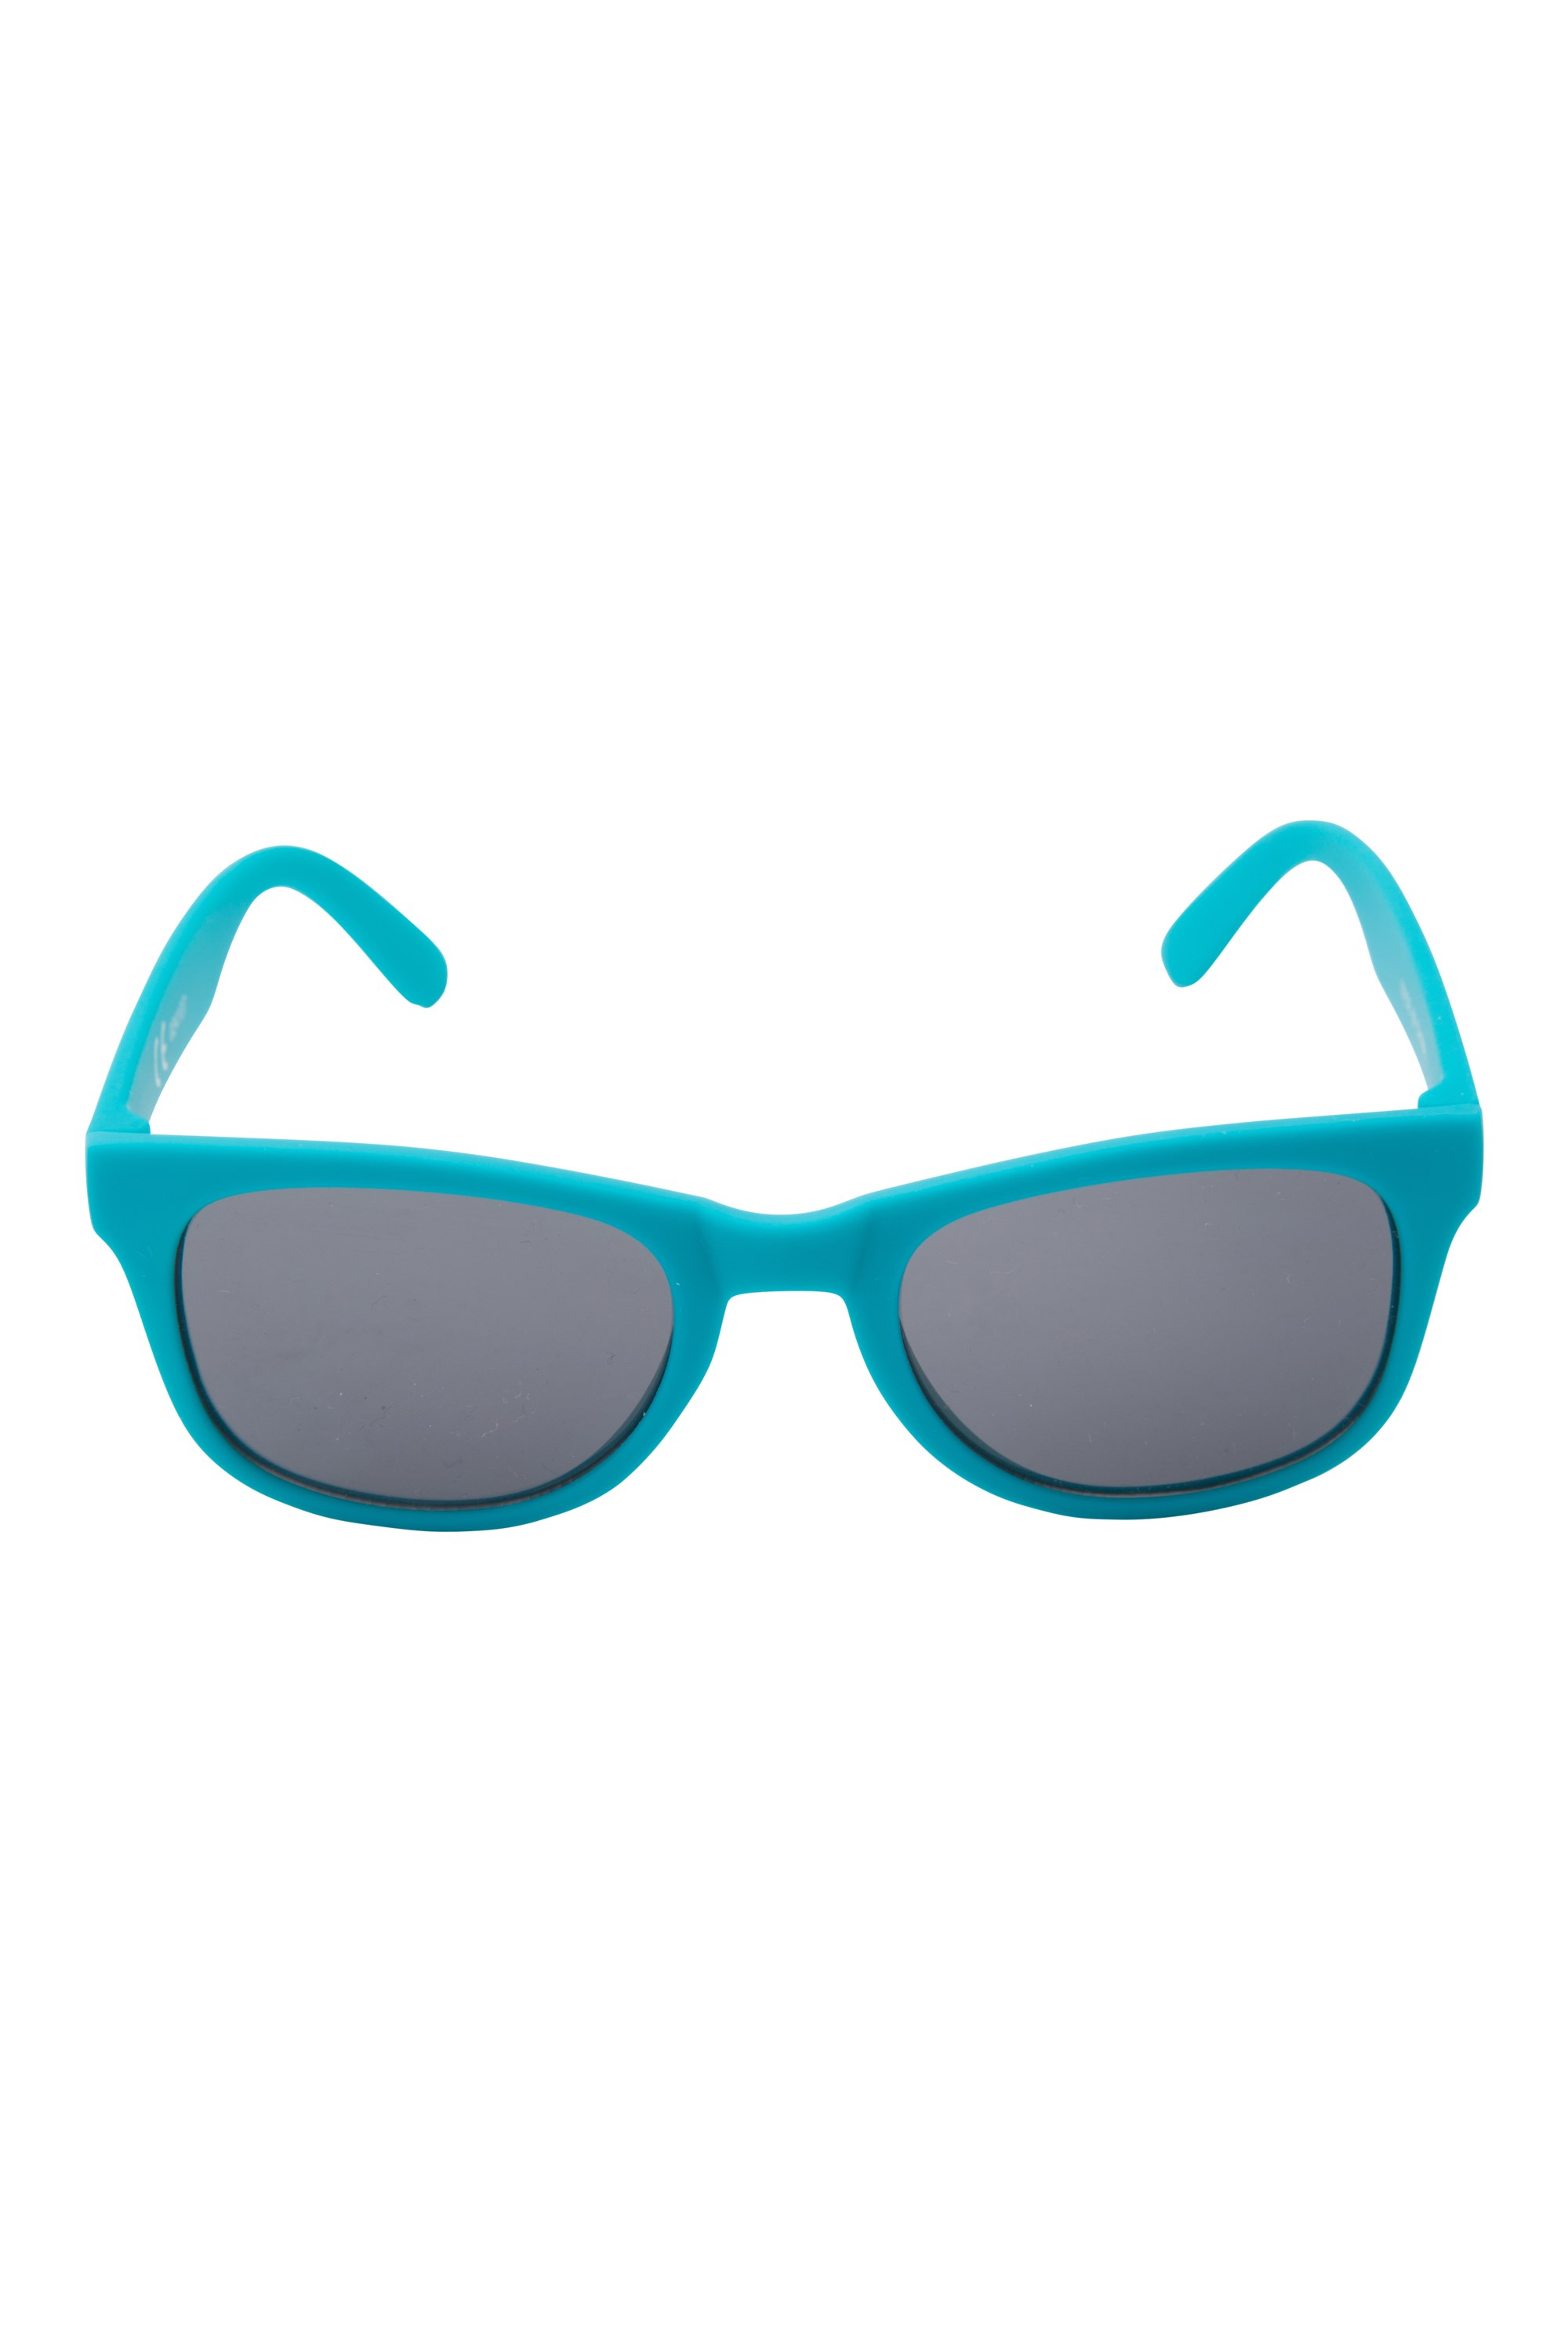 Mountain Warehouse Coral Kids Sunglasses Turquoise